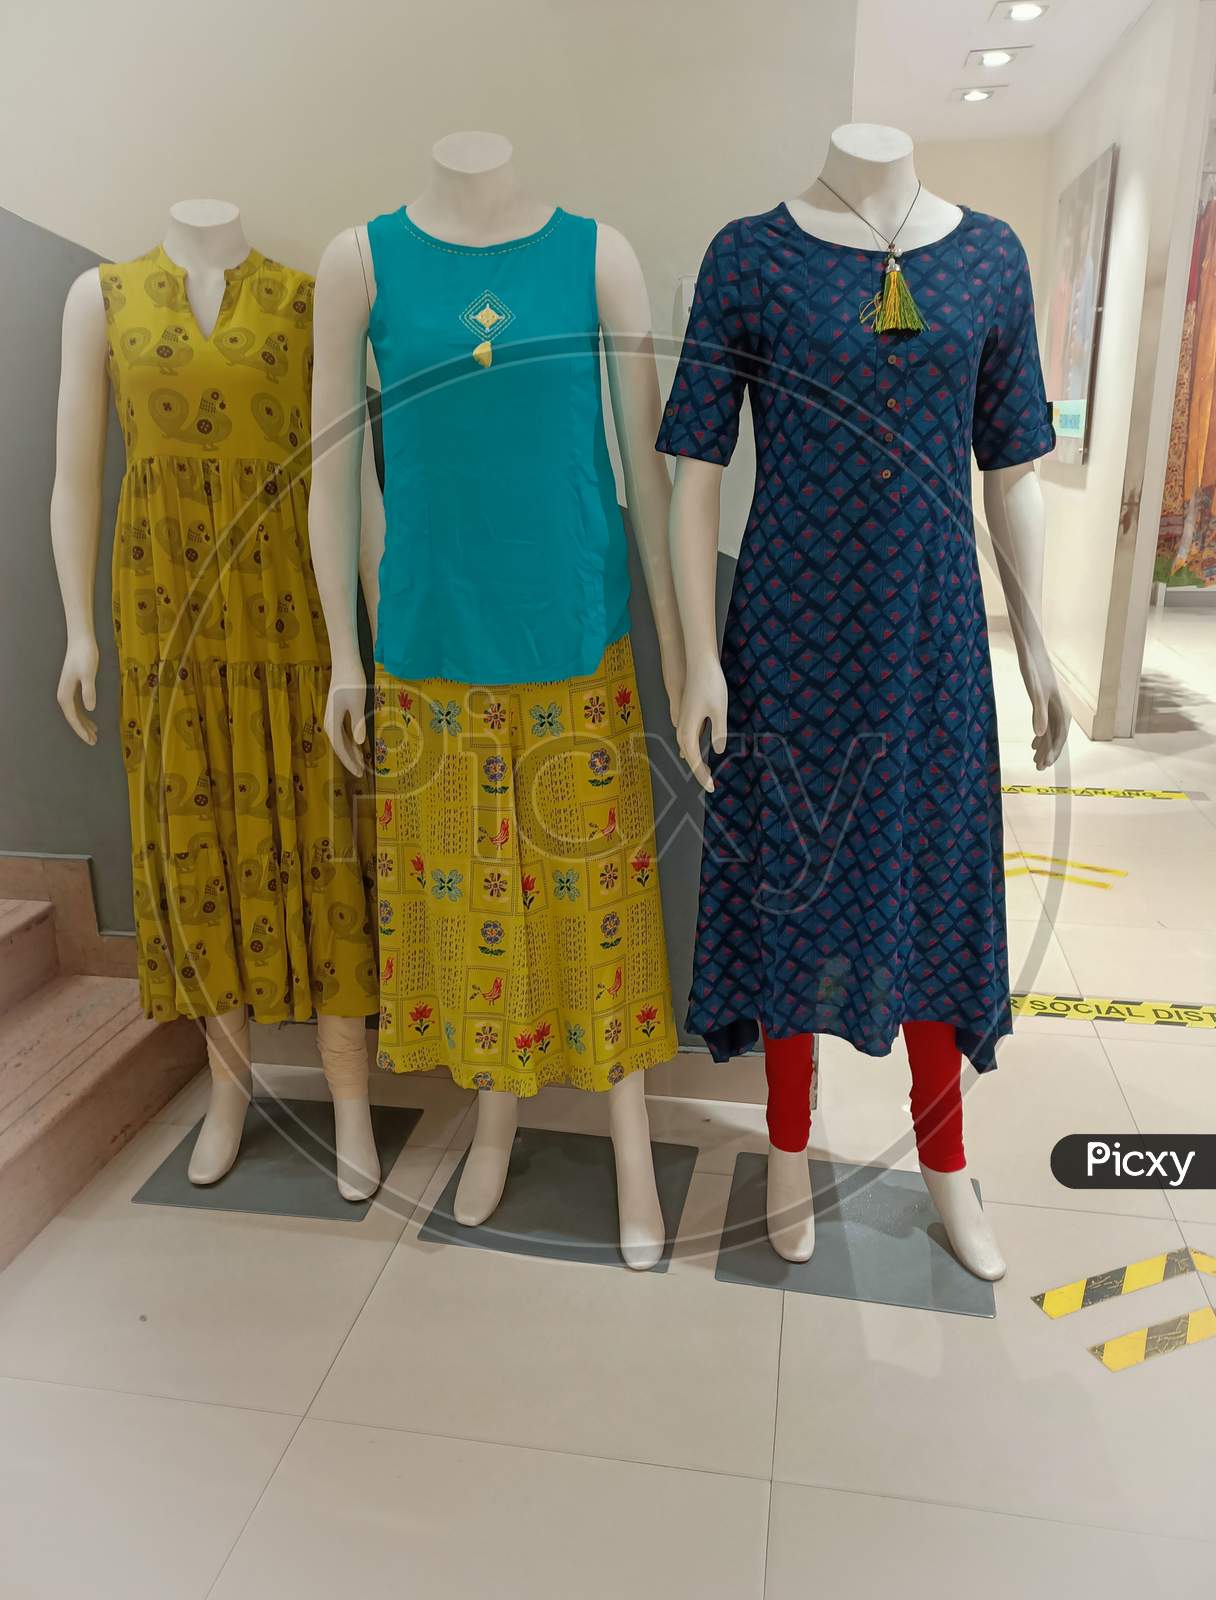 An Charming picture of three mannequins wearing colorful Indian cotton outfits in a fashion store in Mysuru/Karnataka state of India.